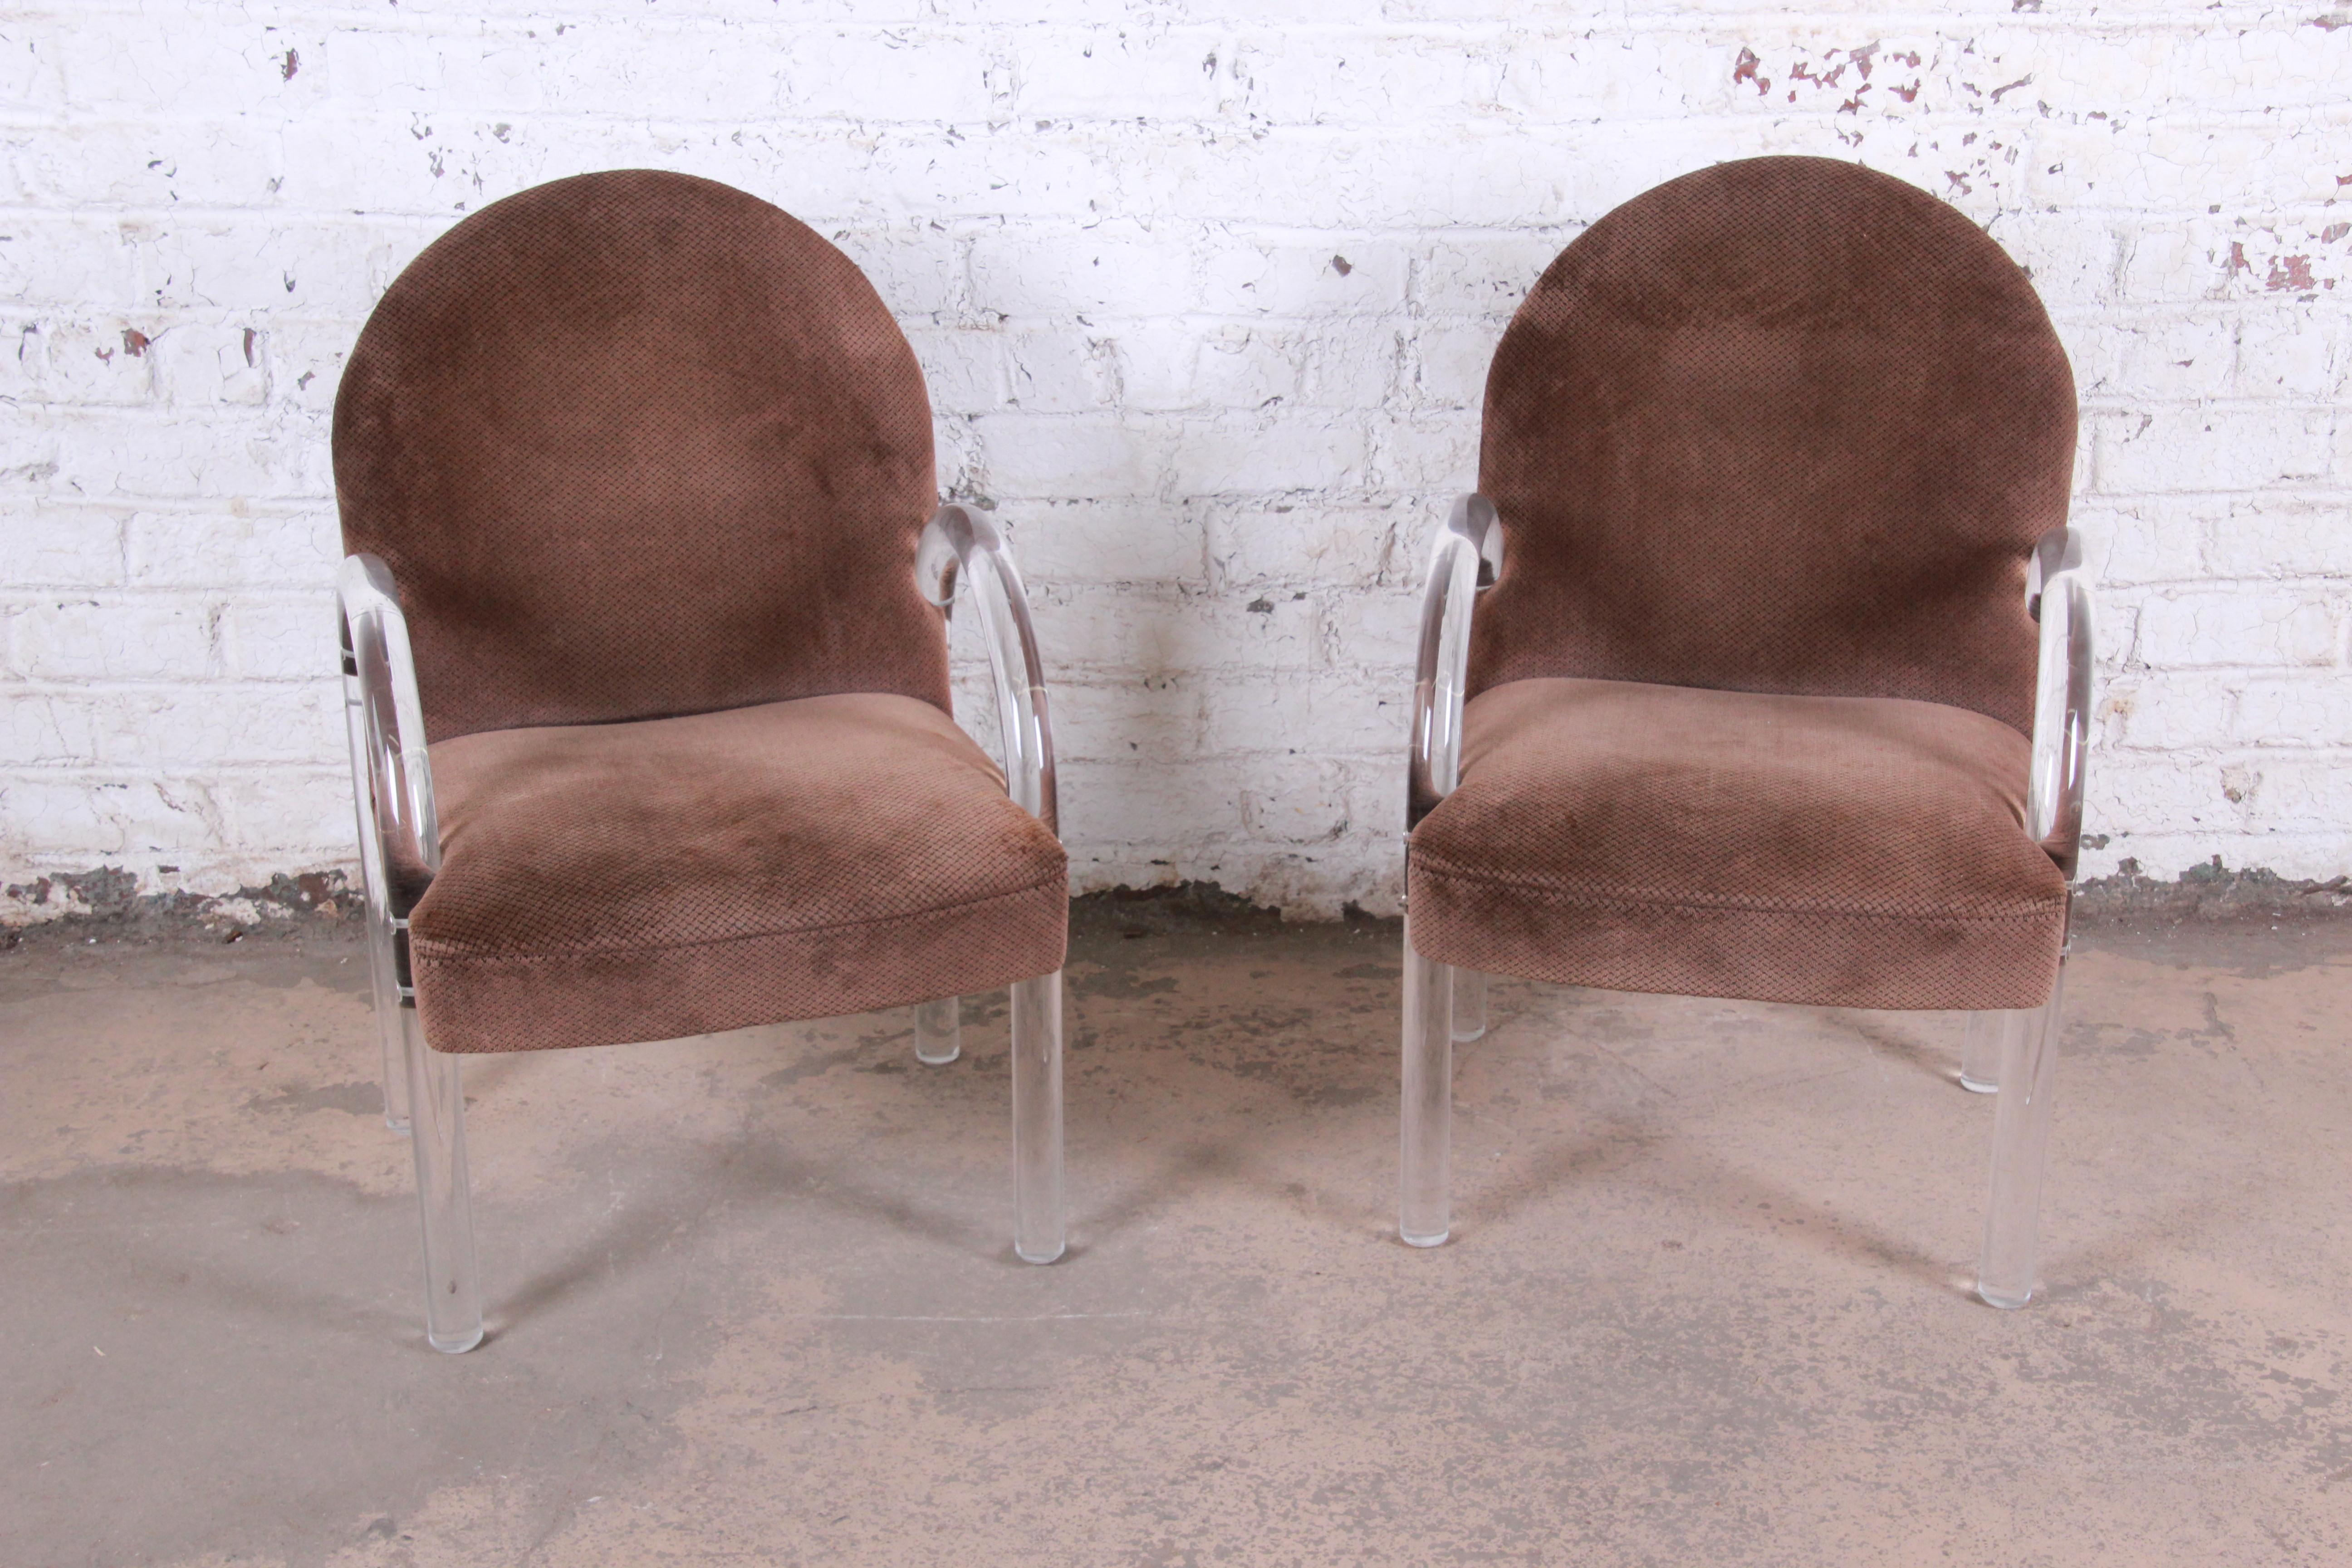 An outstanding pair of modern Art Deco or Hollywood Regency Lucite waterfall club chairs or dining armchairs

By The Pace Collection

USA, 1970s

Solid curved Lucite arms, with brass fittings and original brown microfiber